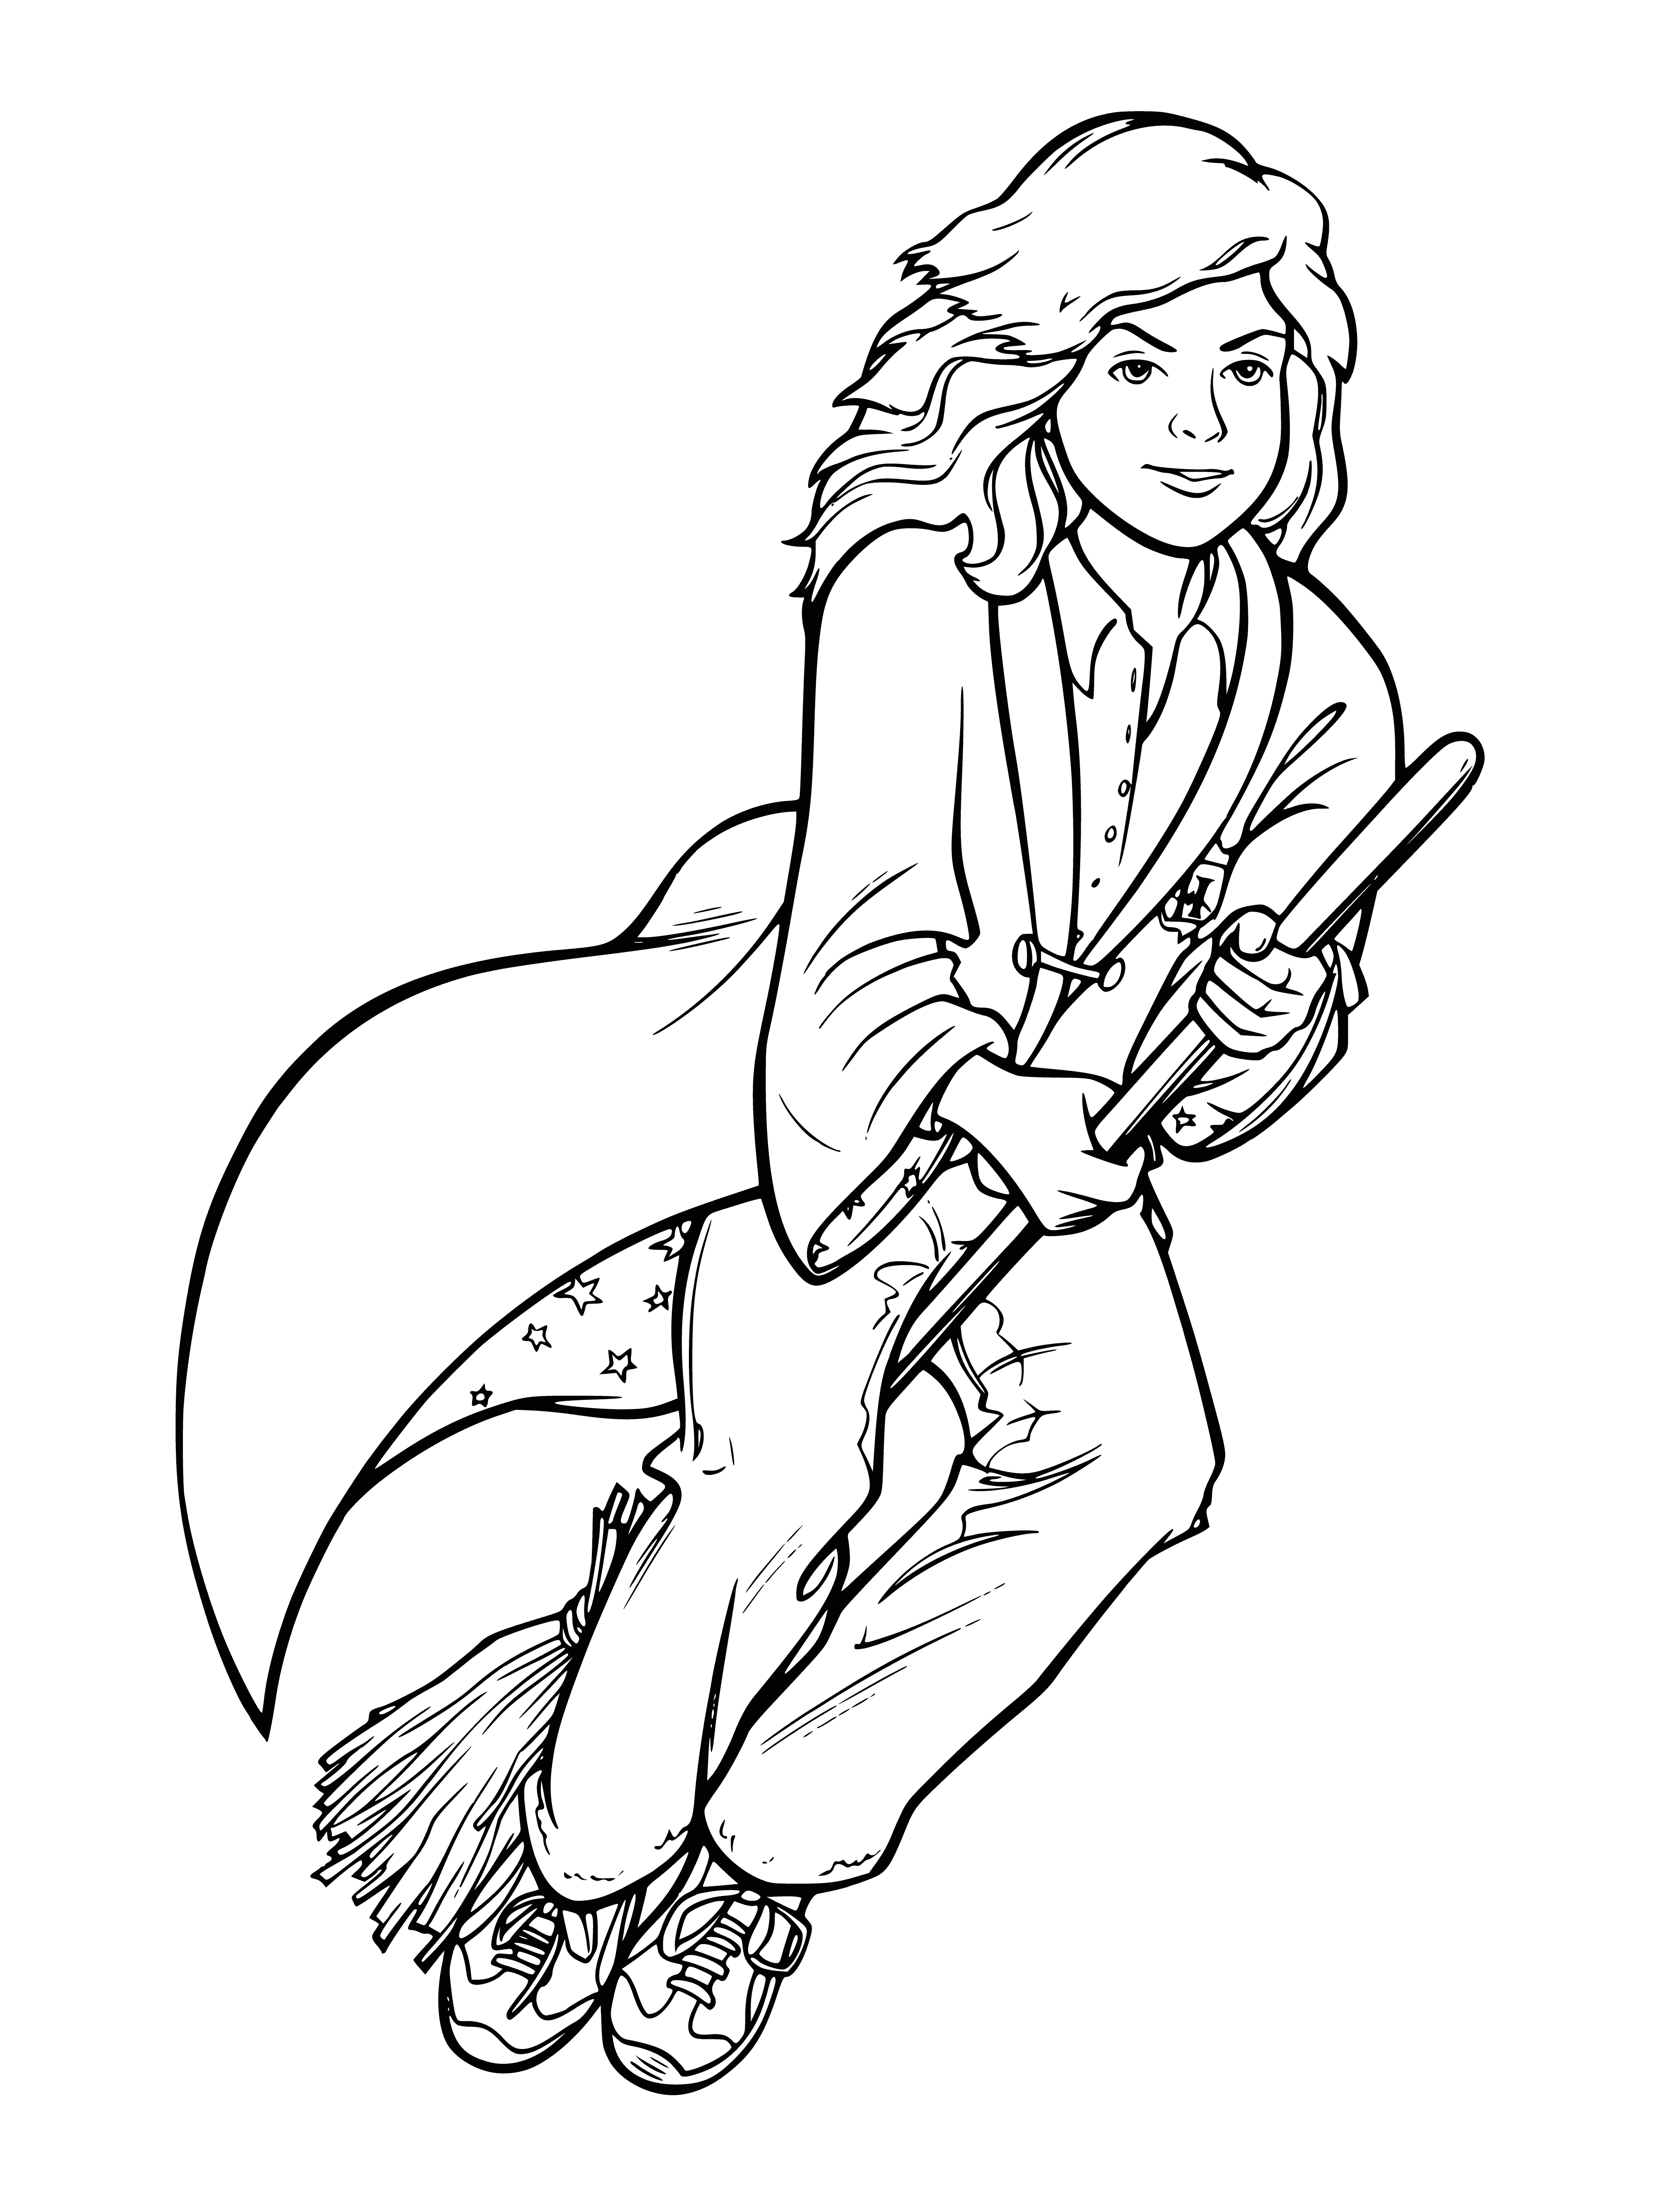 coloring page: Girl flies on broom, holds wand and wears robe with determined look; hair blowing back in wind.